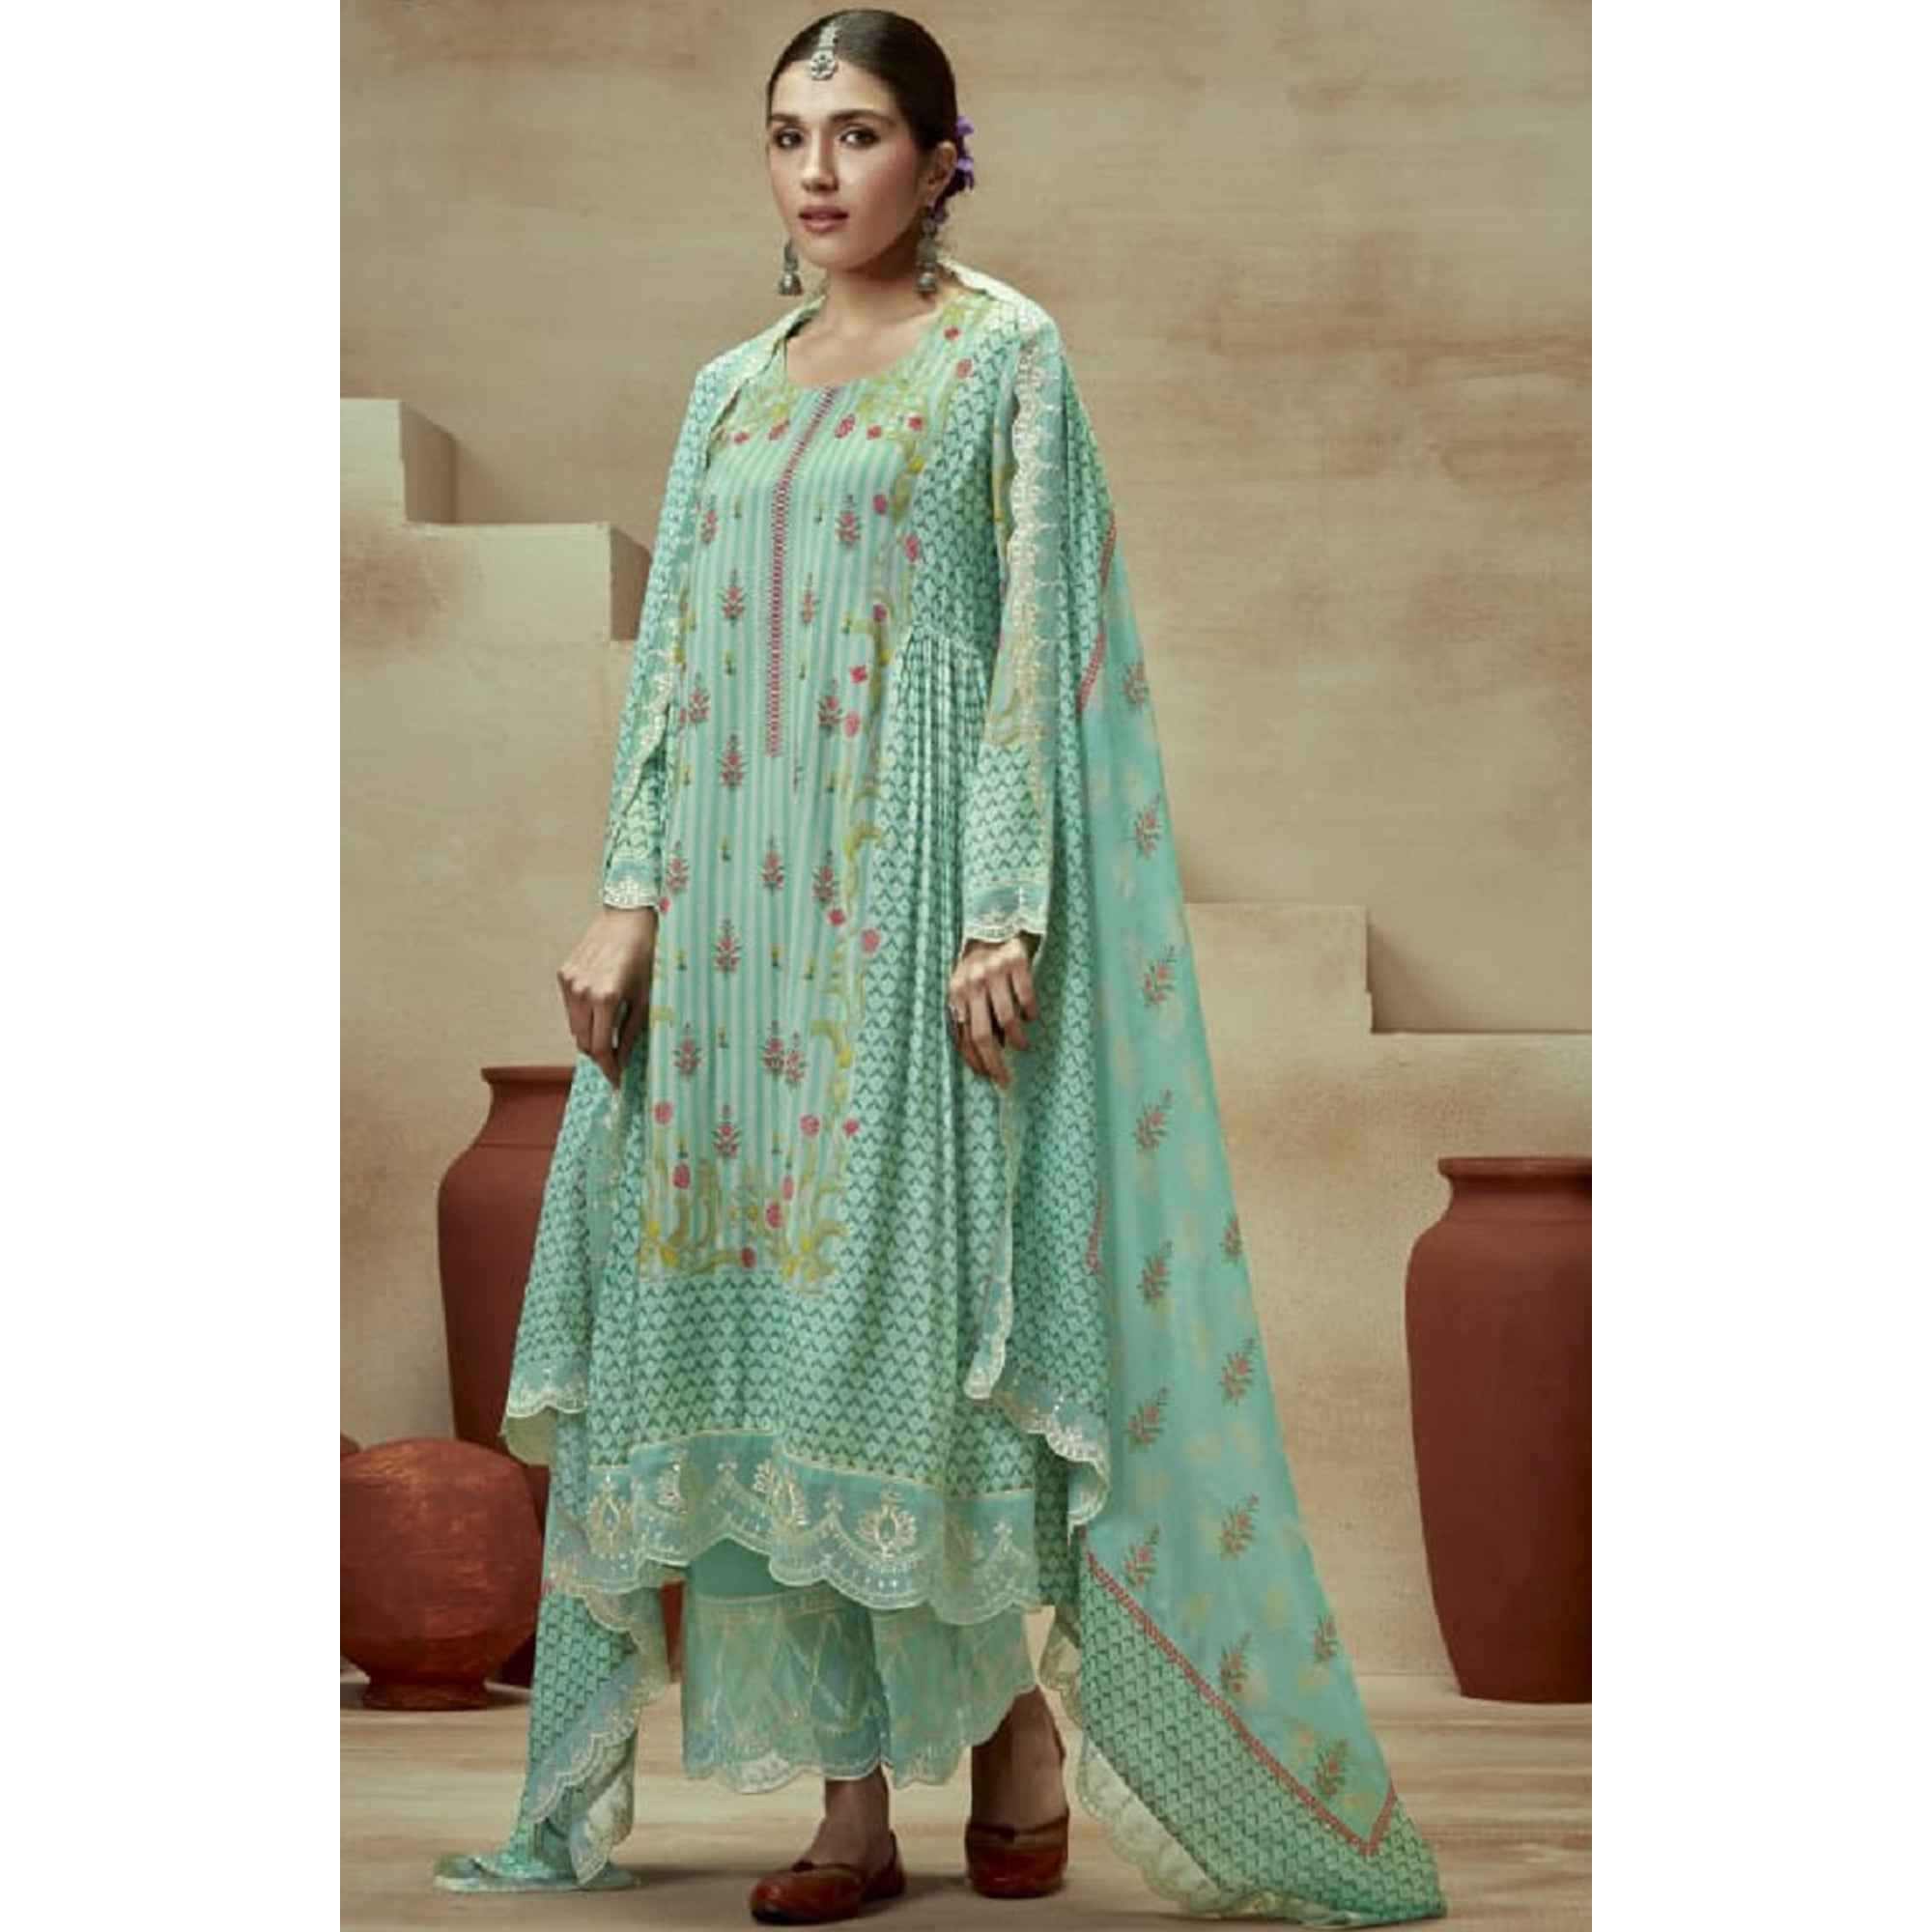 Indian Designer Digital Printed Work With Embroidery Work Shalwar Kameez Plazzo Suits